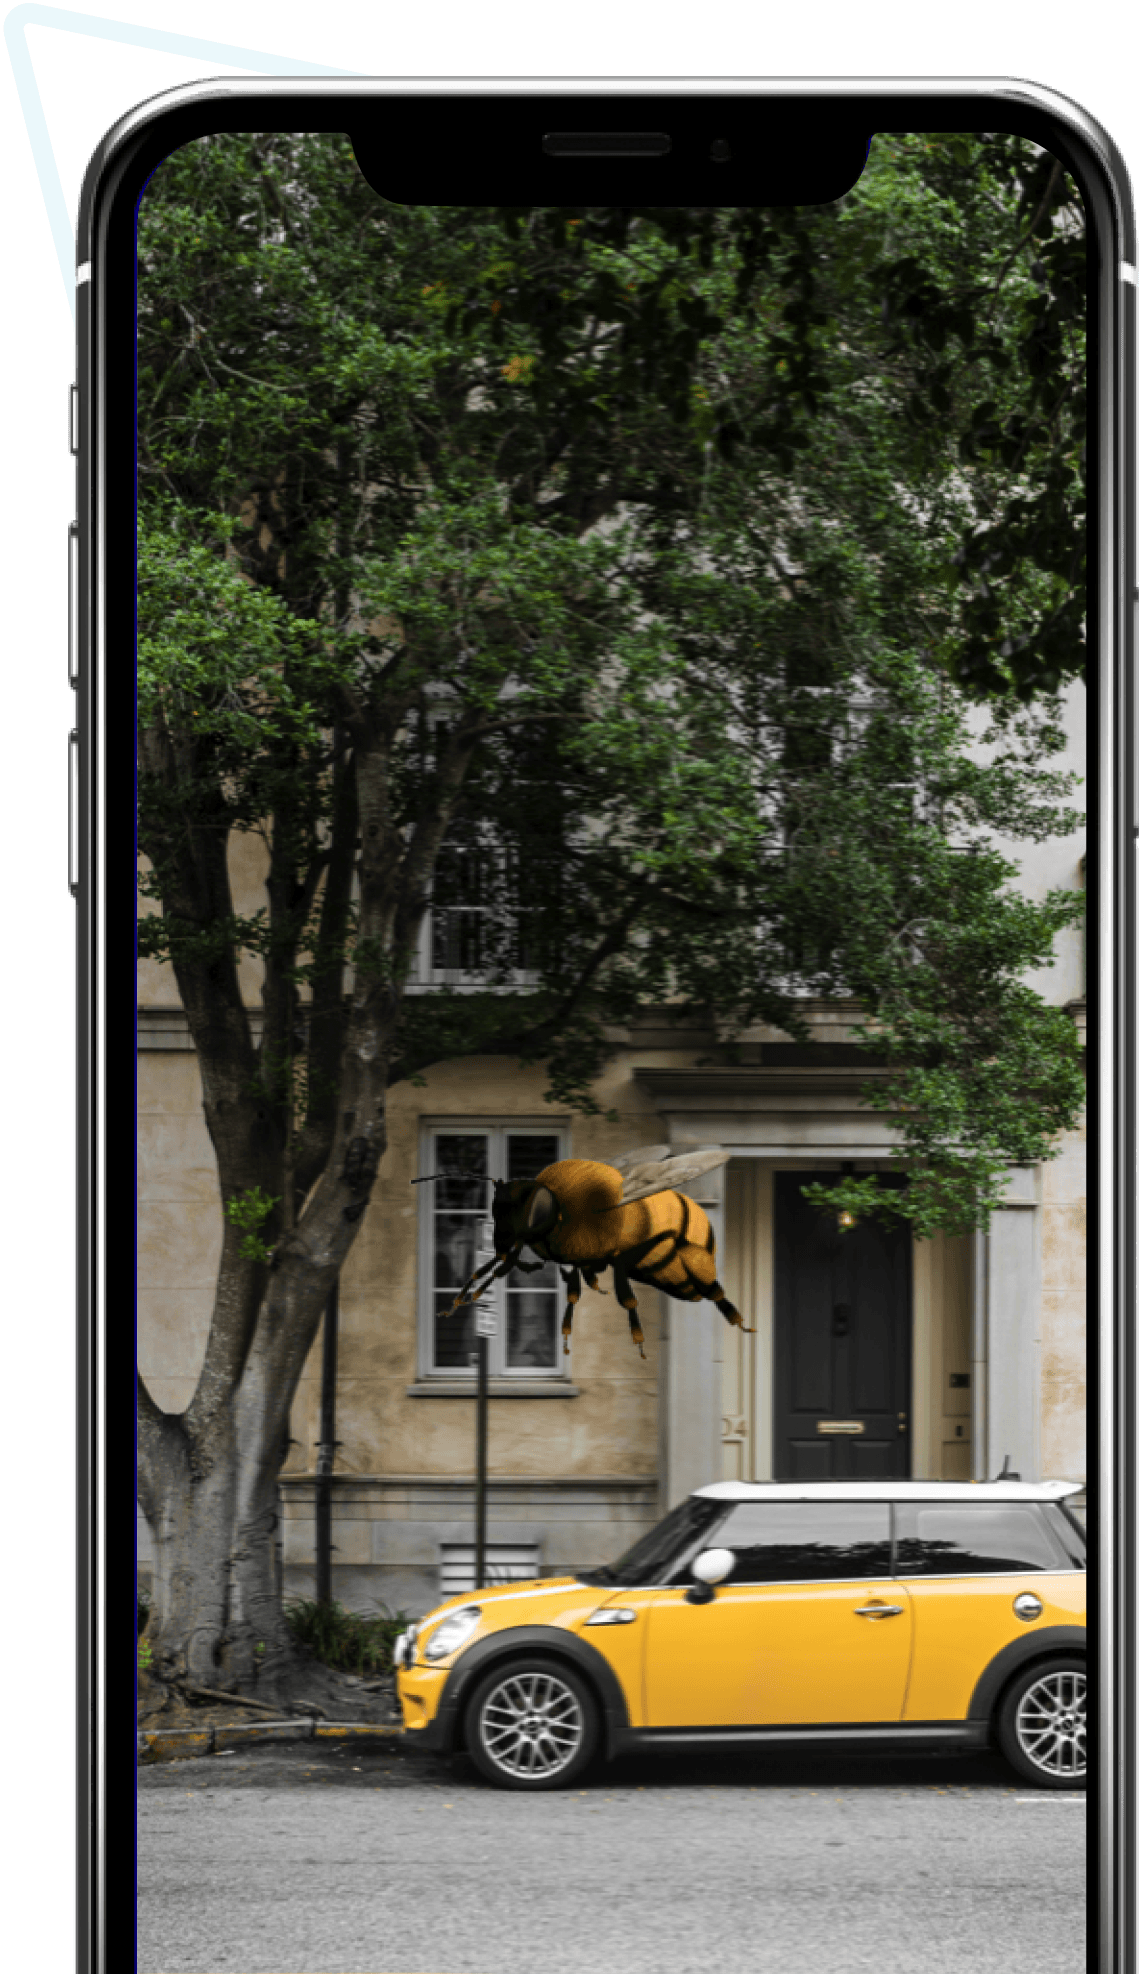 Bumblebee in real life using AR - outdoors